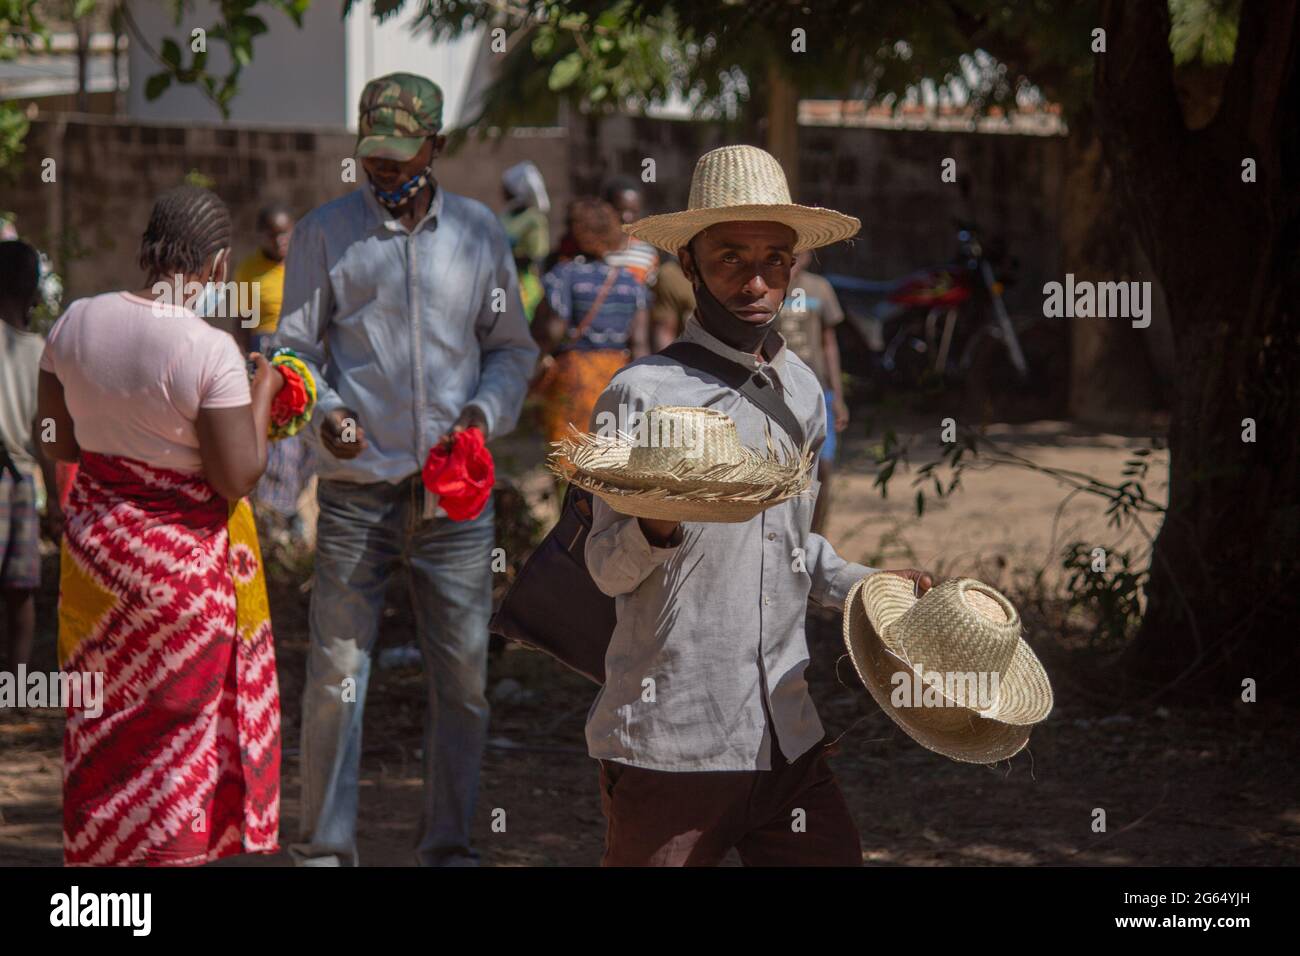 Artist selling straw hats on the street Stock Photo